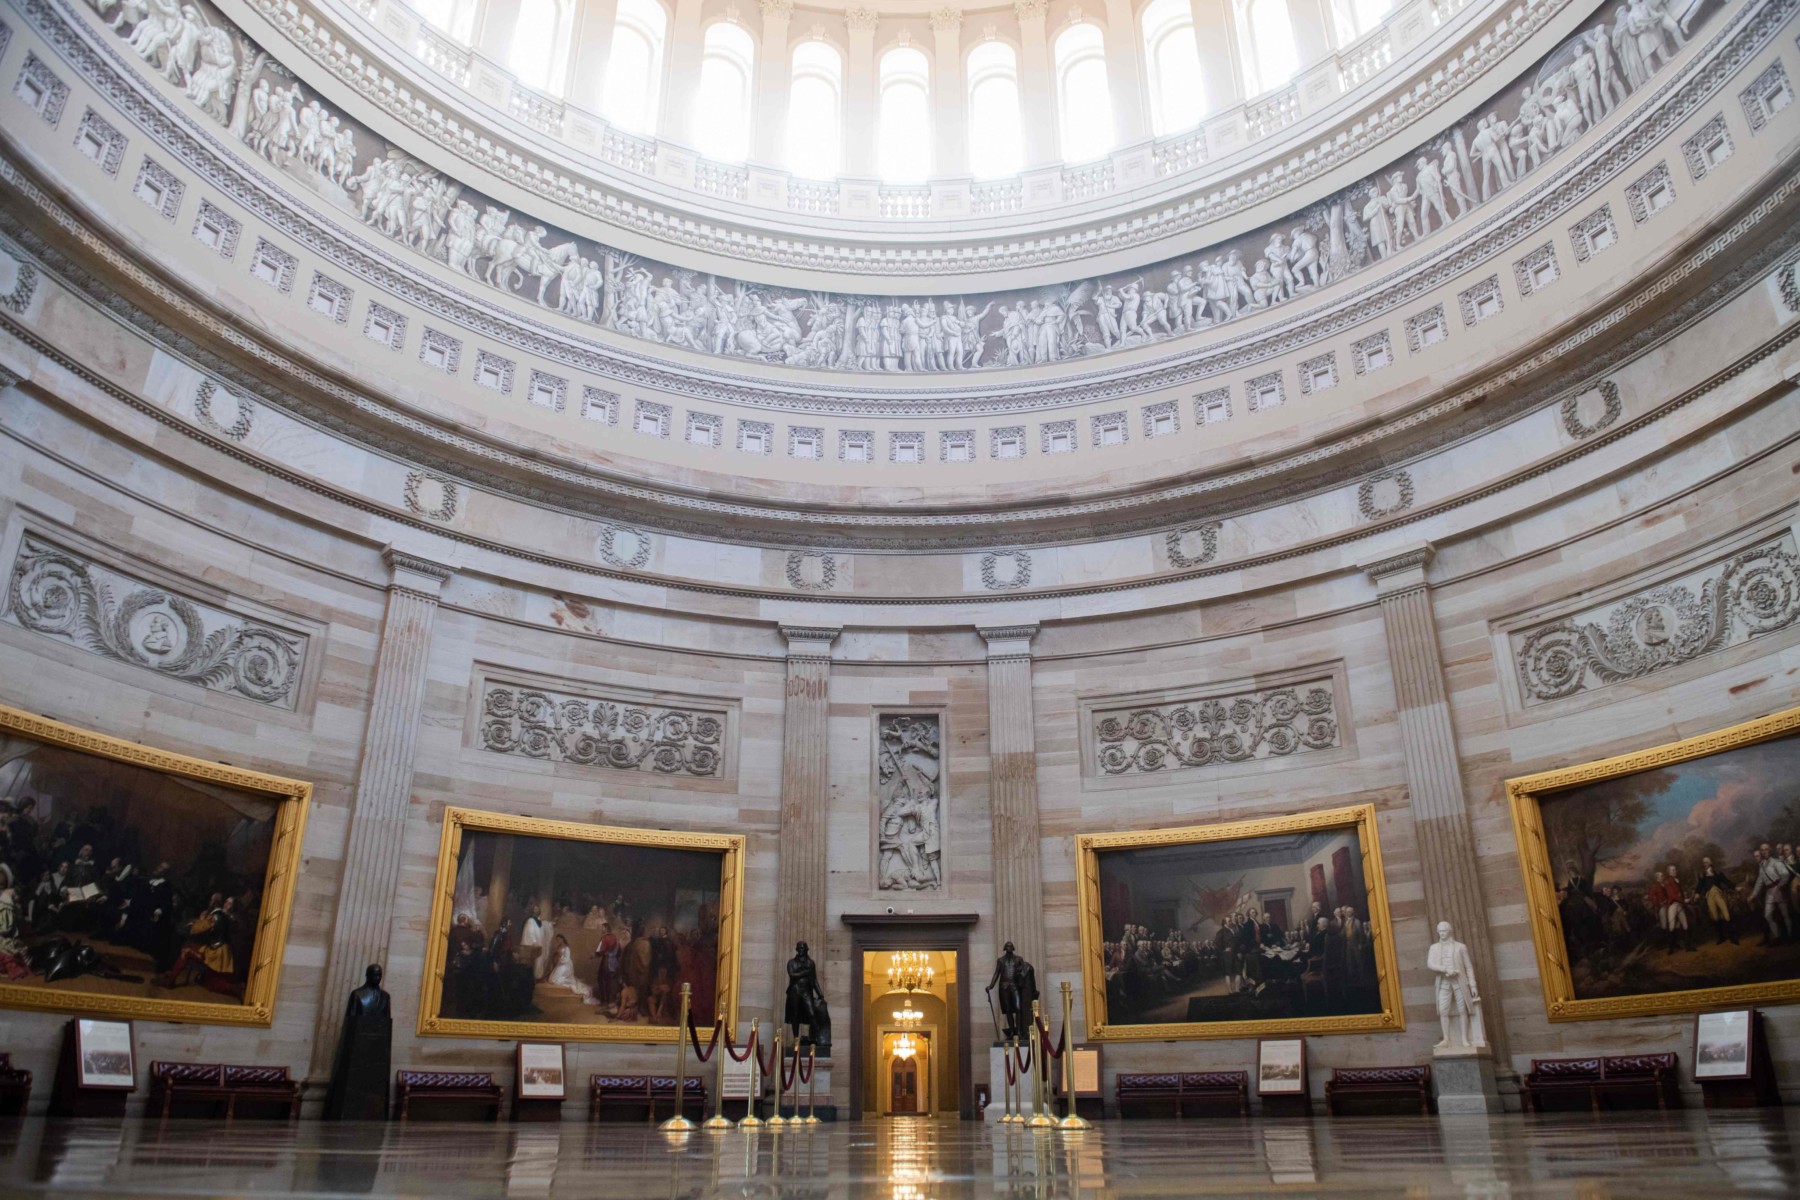 The U.S. Capitol in Washington D.C. is pictured with no visitors